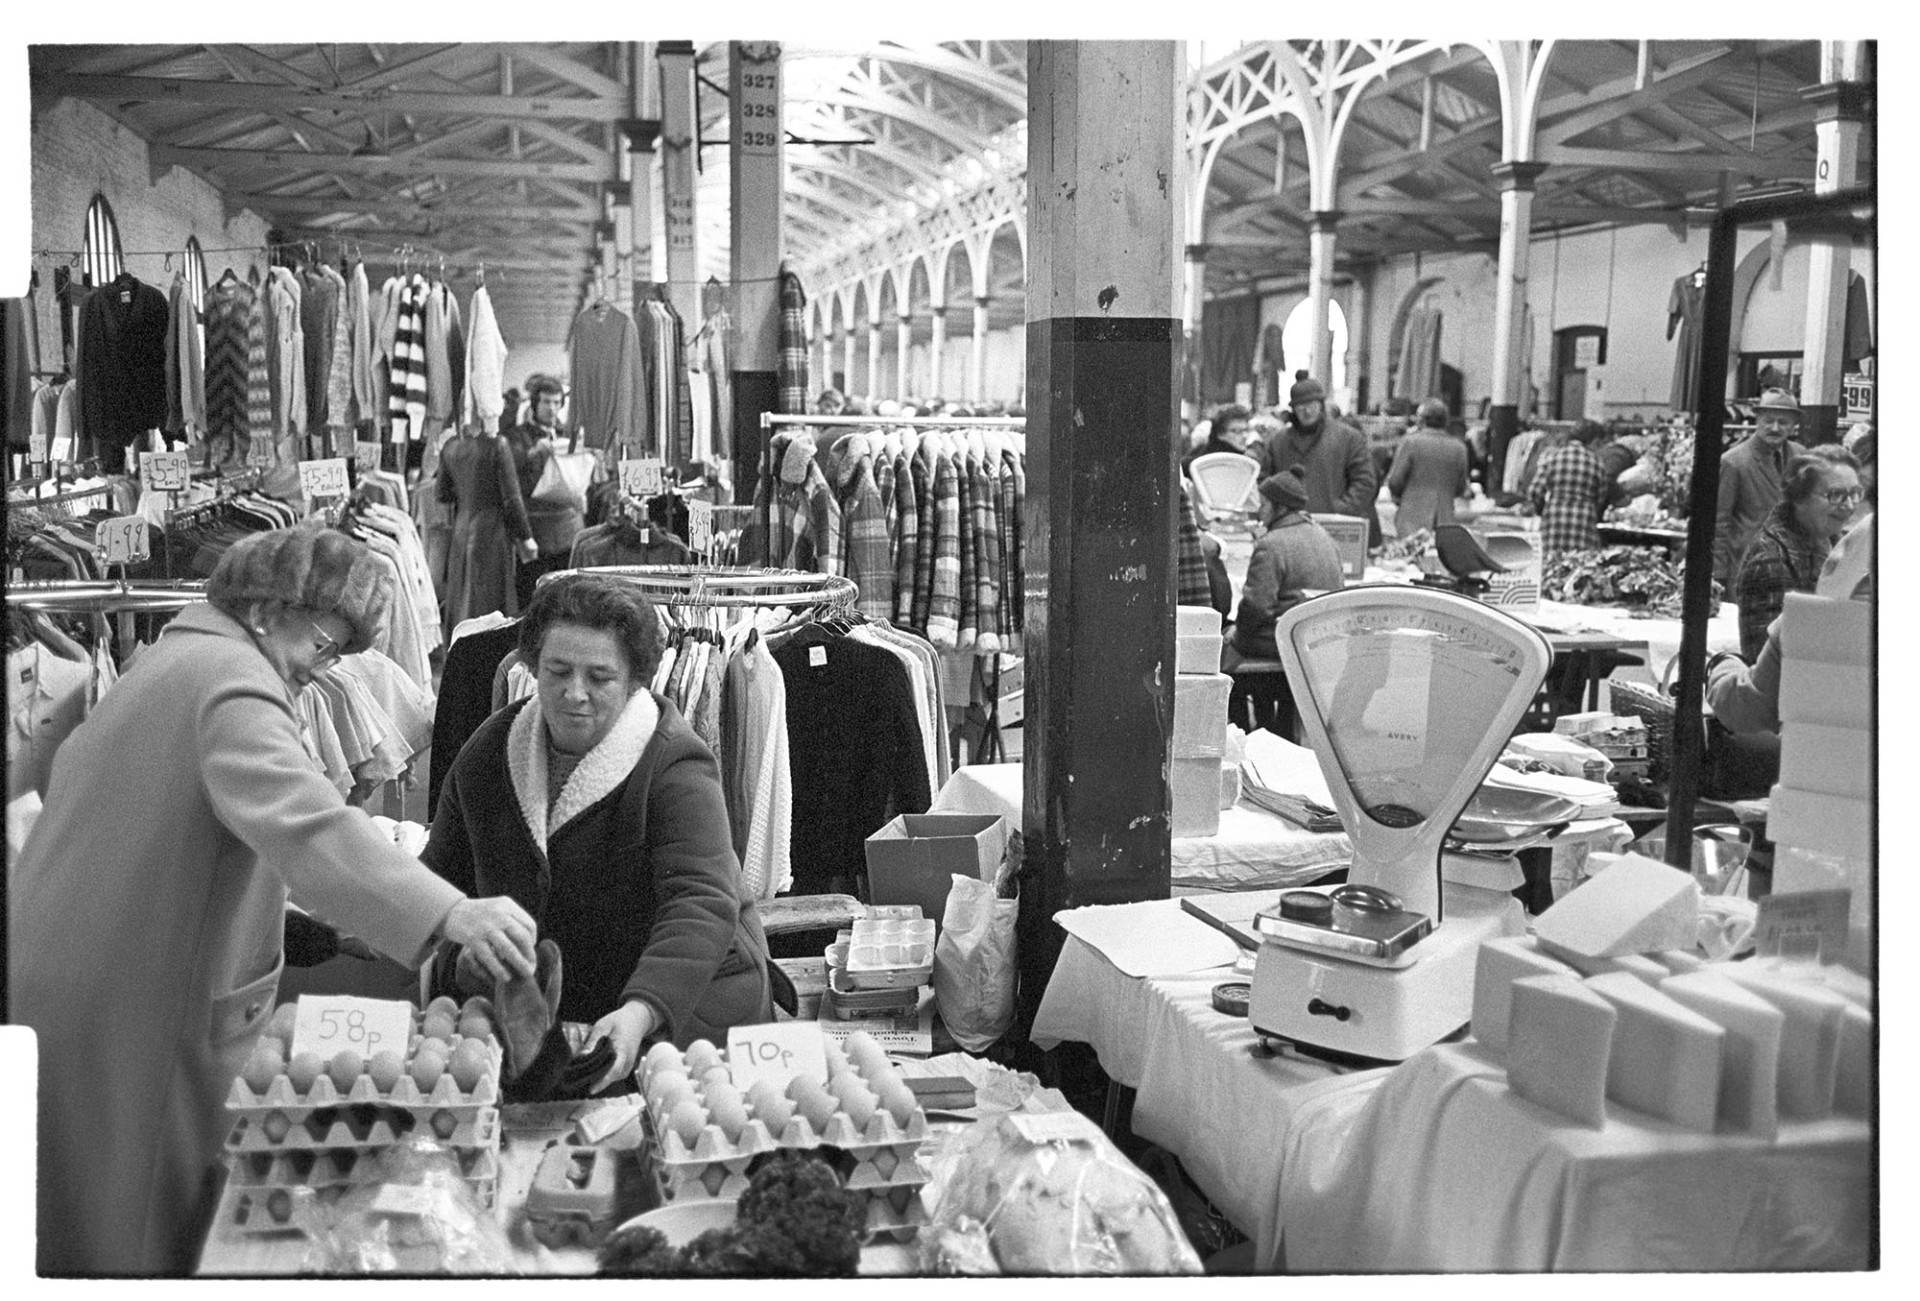 Stalls at Pannier Market. Eggs and cheese, woman serving. 
[An egg stall and cheese stall at Barnstaple Pannier Market. A woman is serving another woman on the egg stall. In the background rails of clothes and other shoppers can be seen.]